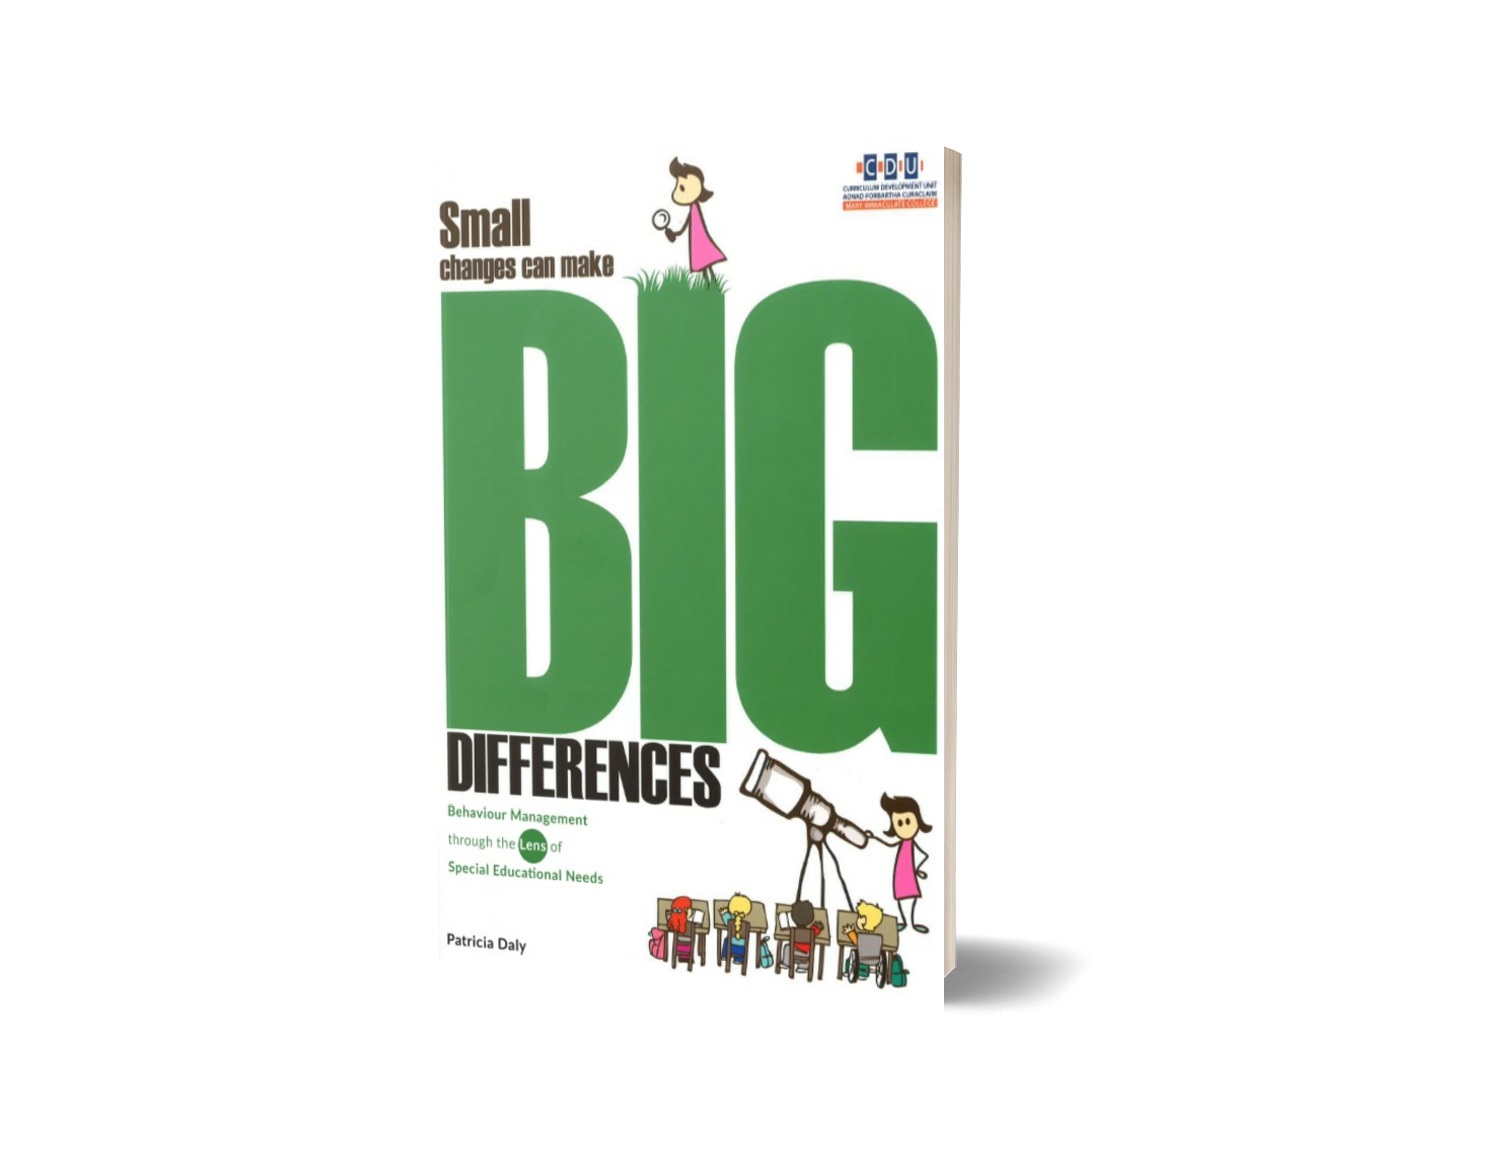 Learning　Box　can　make　Outside　BIG　the　Differences　Resources　Small　Changes